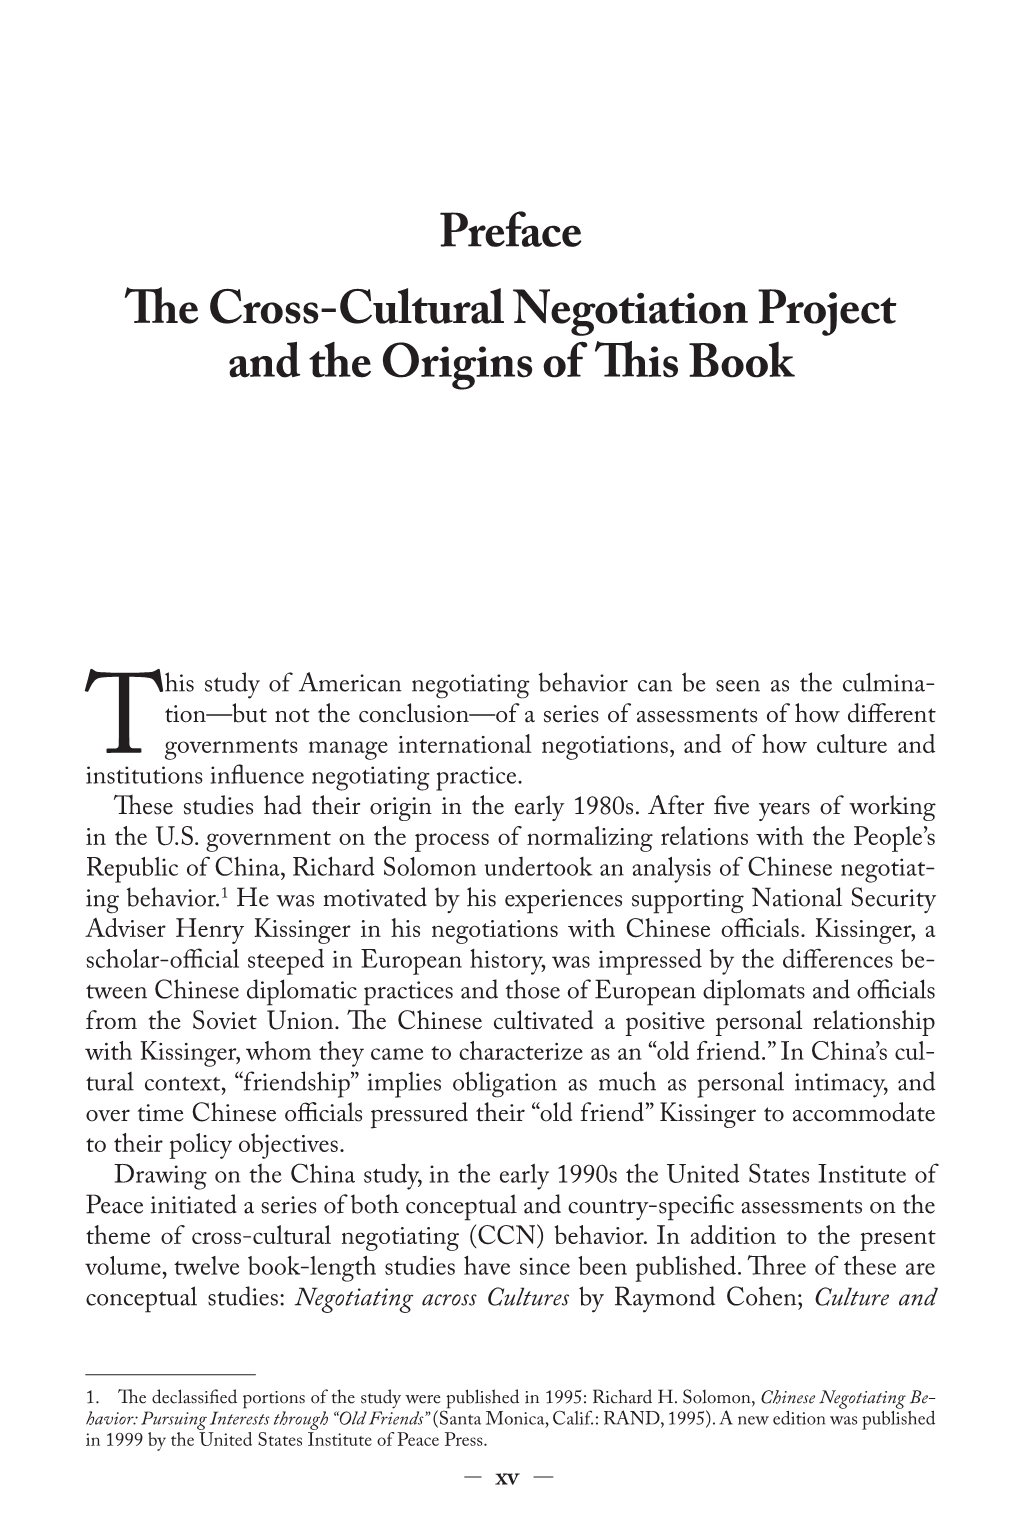 Preface the Cross-Cultural Negotiation Project and the Origins of This Book